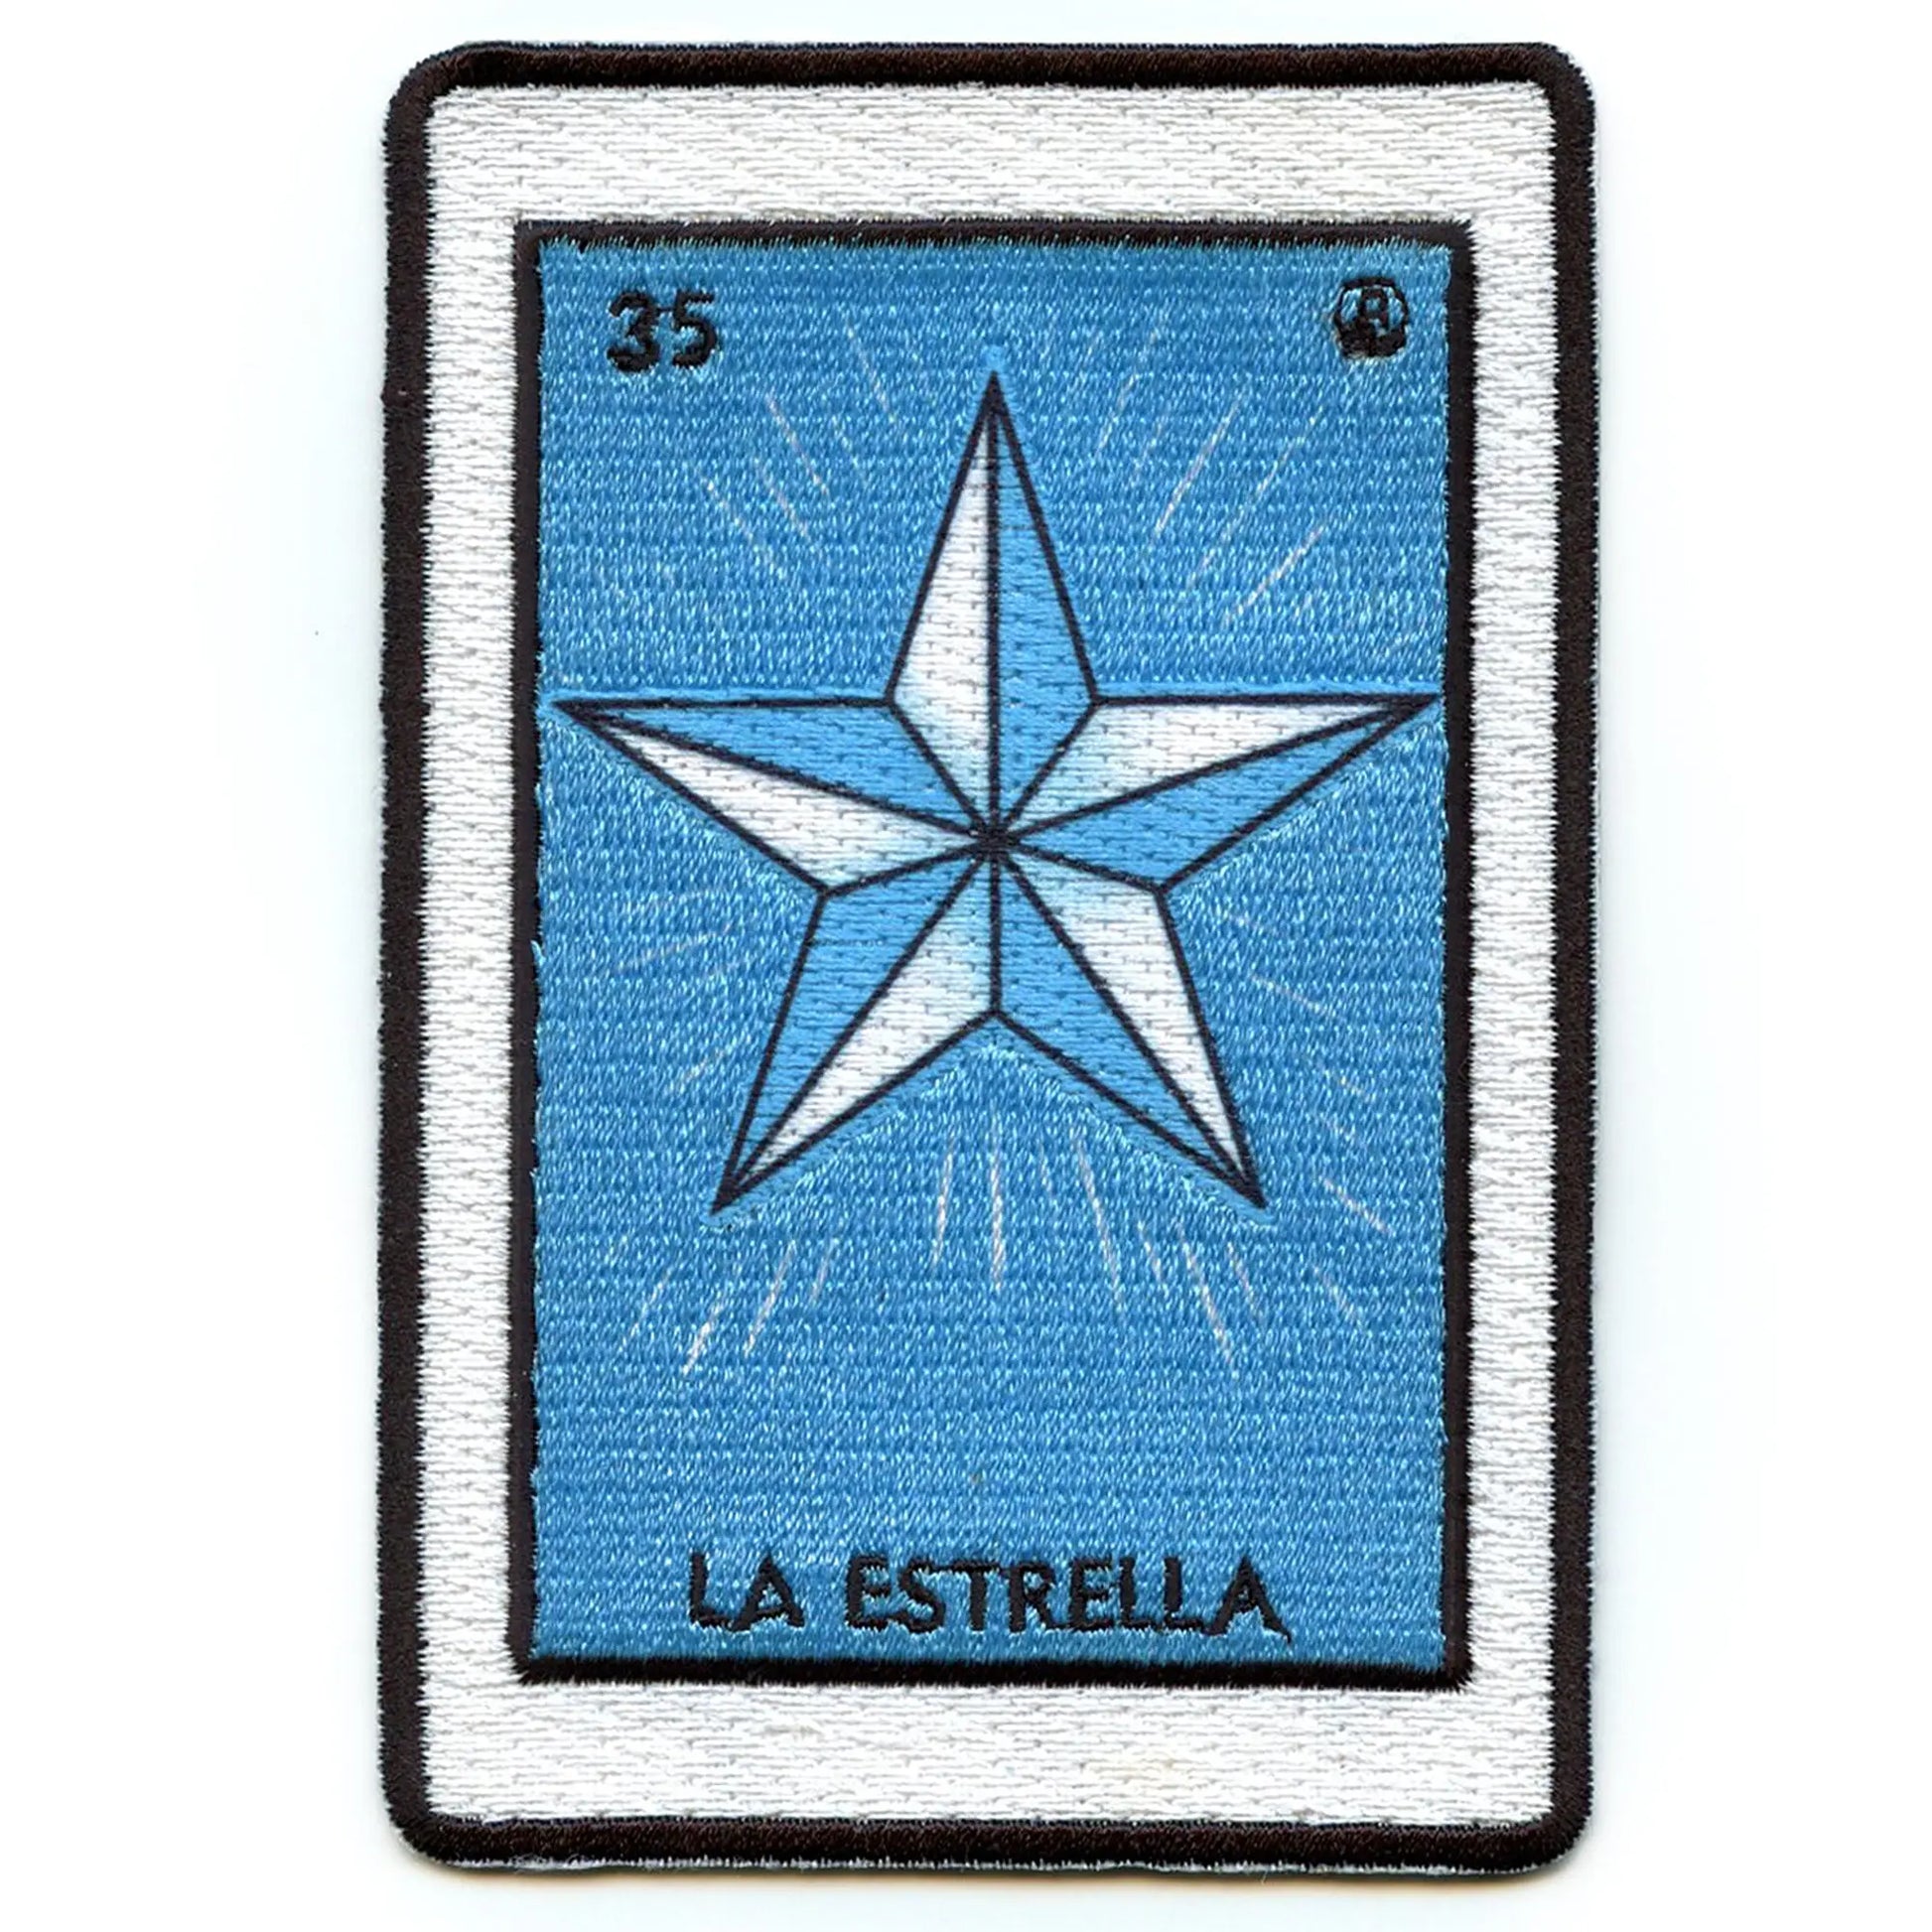 La Estrella 35 Patch Mexican Loteria Card Sublimated Embroidery Iron On